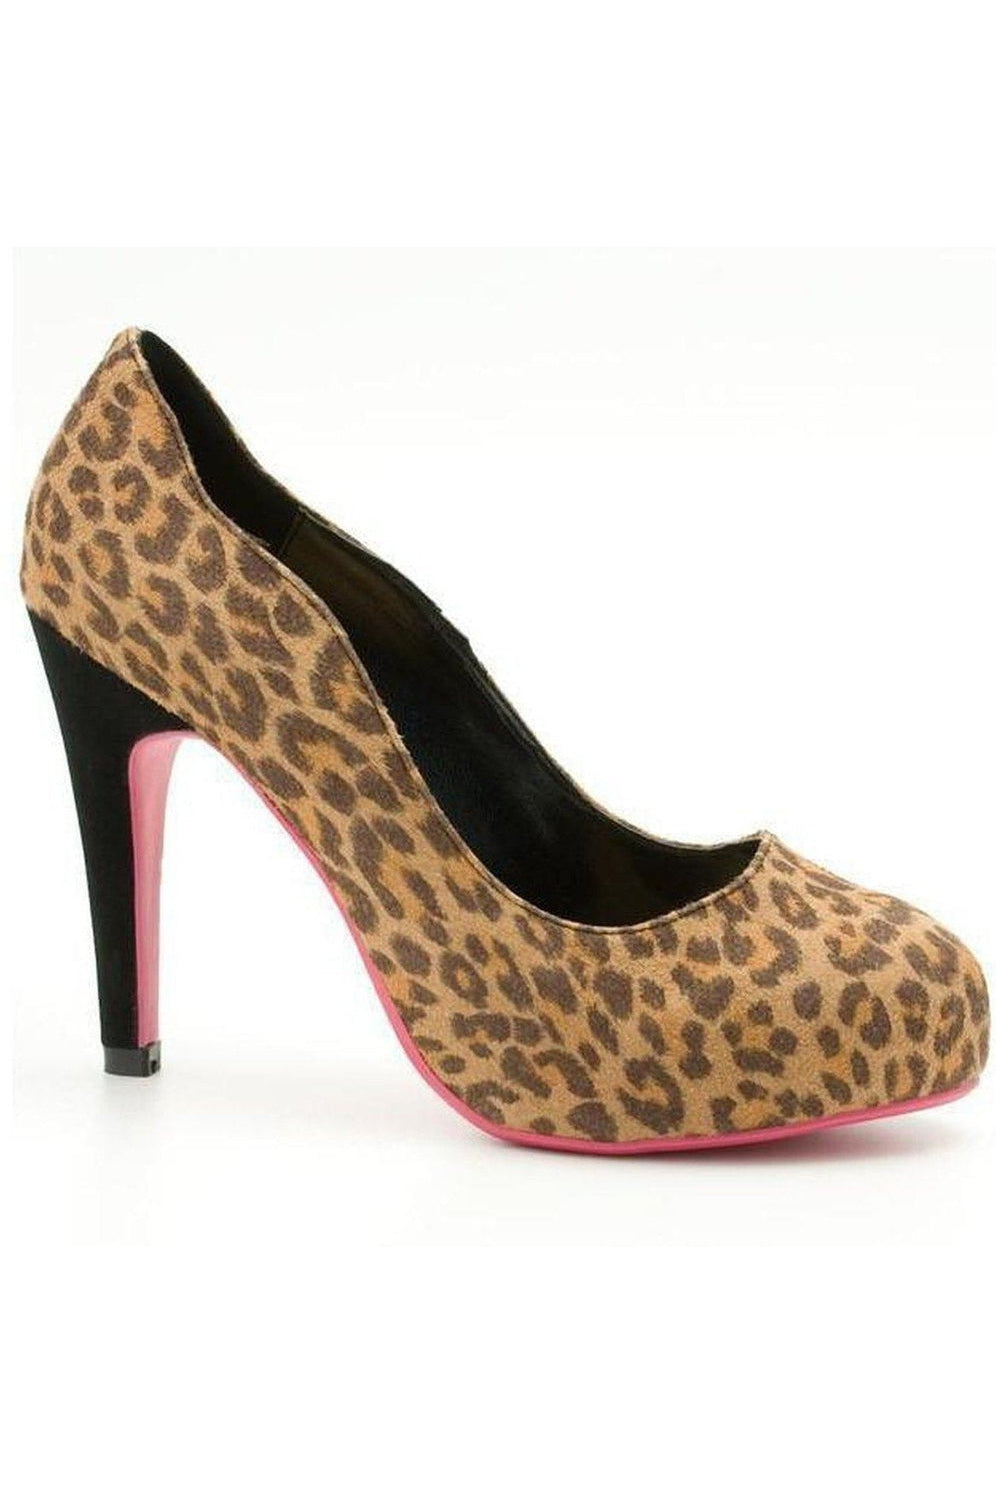 Suede Baby Doll-Leopard-Sexyshoes Brand-Animal-Pumps-SEXYSHOES.COM